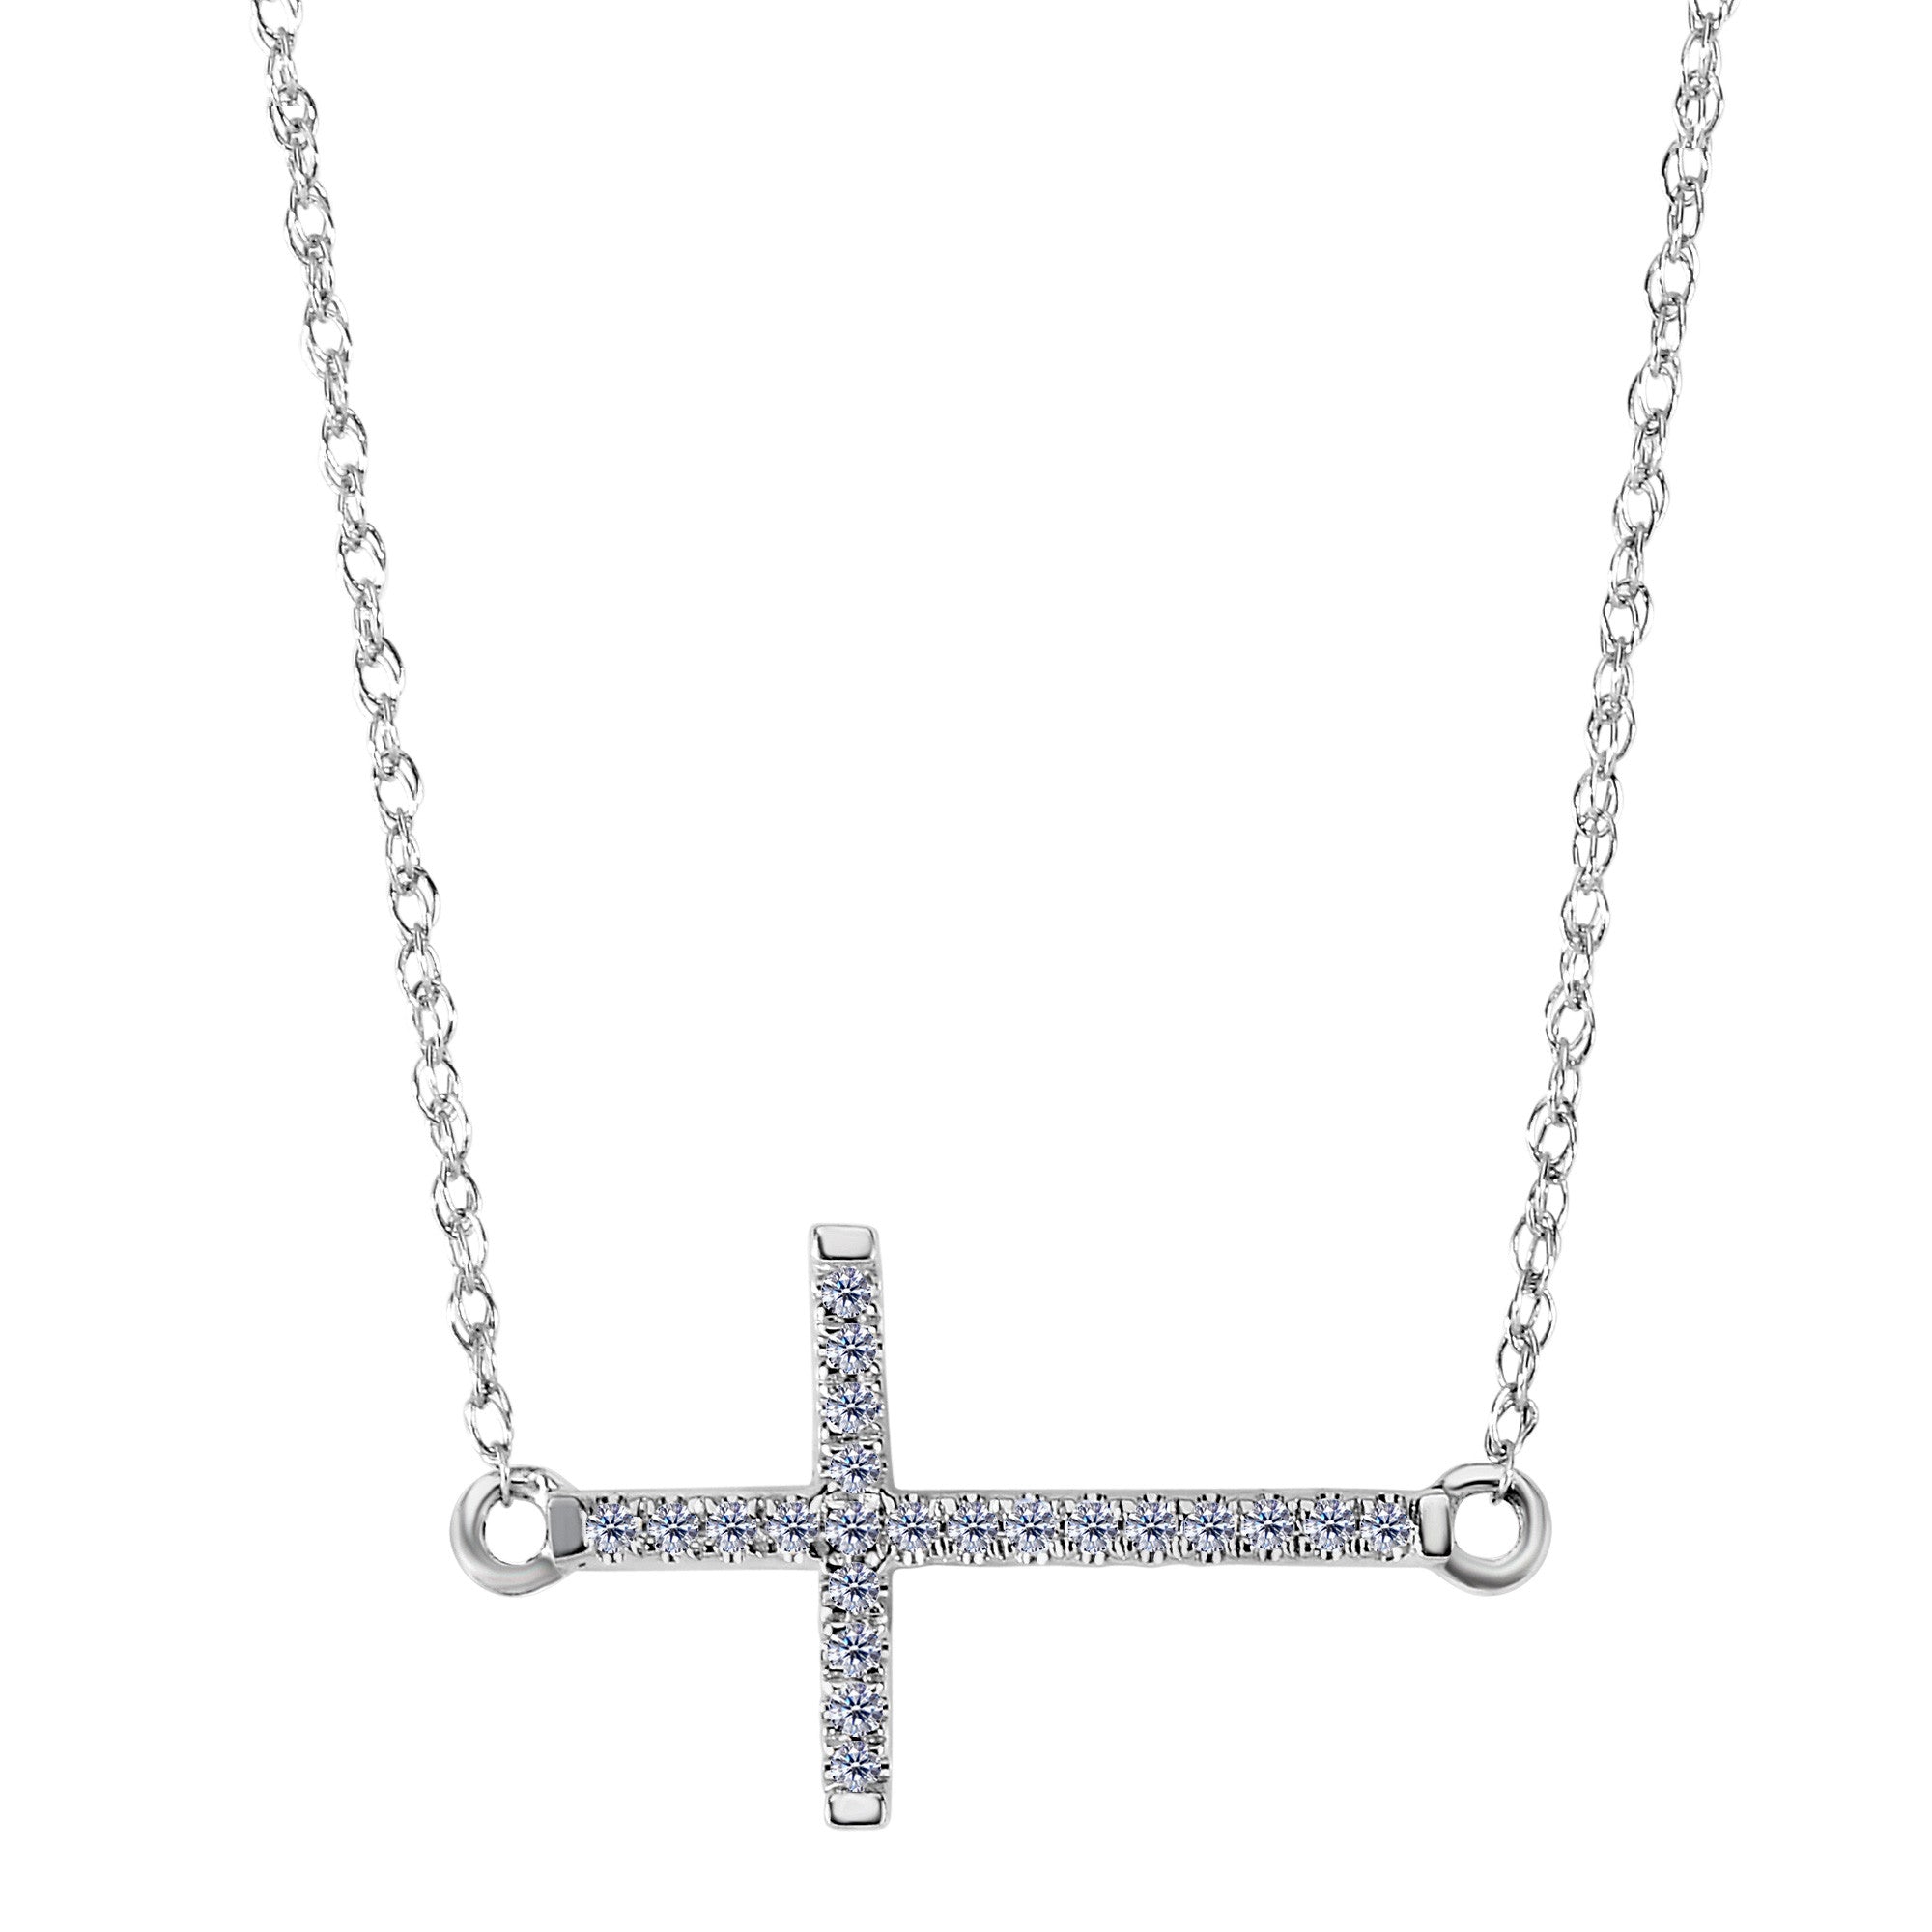 14k White Gold With 0.05ct Diamonds Side Ways Cross Necklace - 18 Inches - JewelryAffairs
 - 1